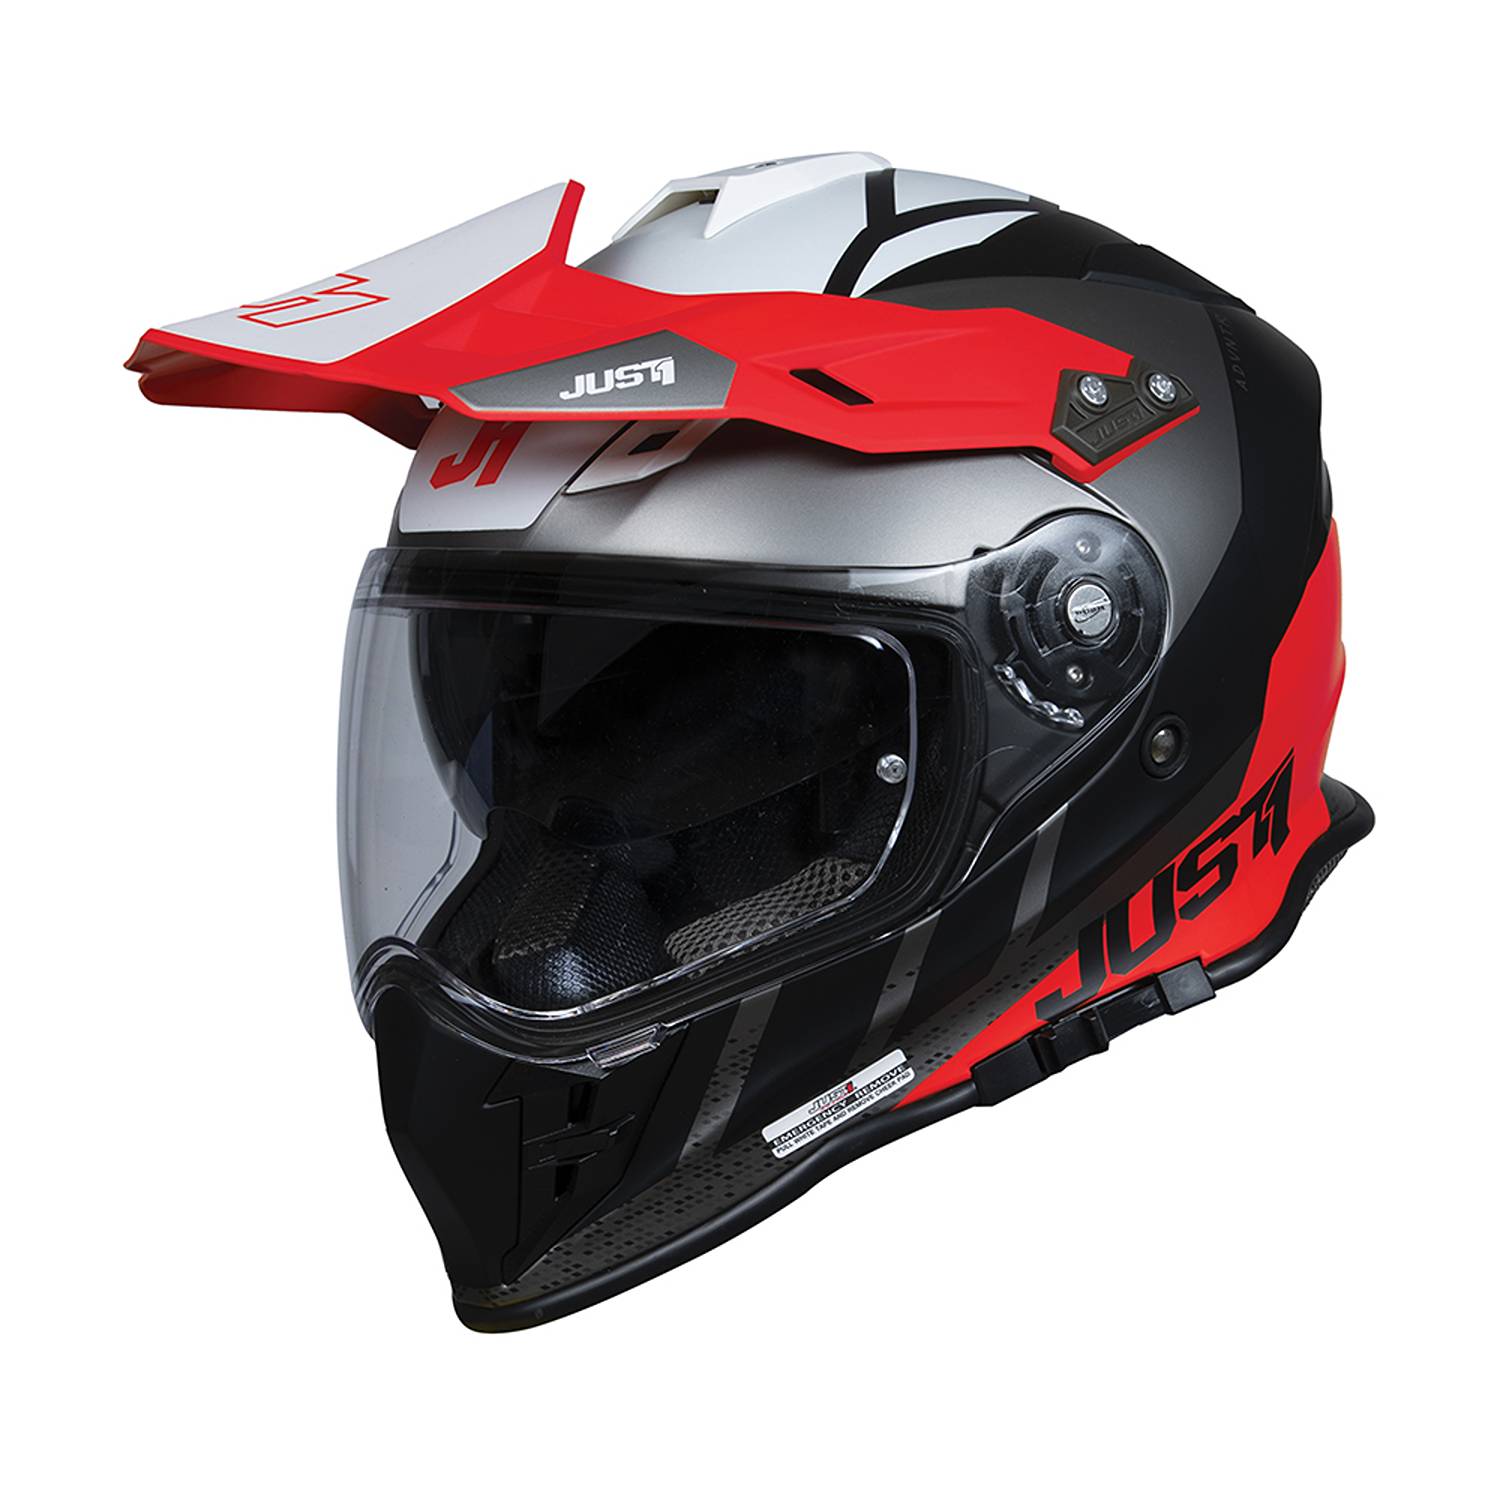 Image of Just1 J34 Pro Outerspace Black Red White Adventure Helmet Size M EN